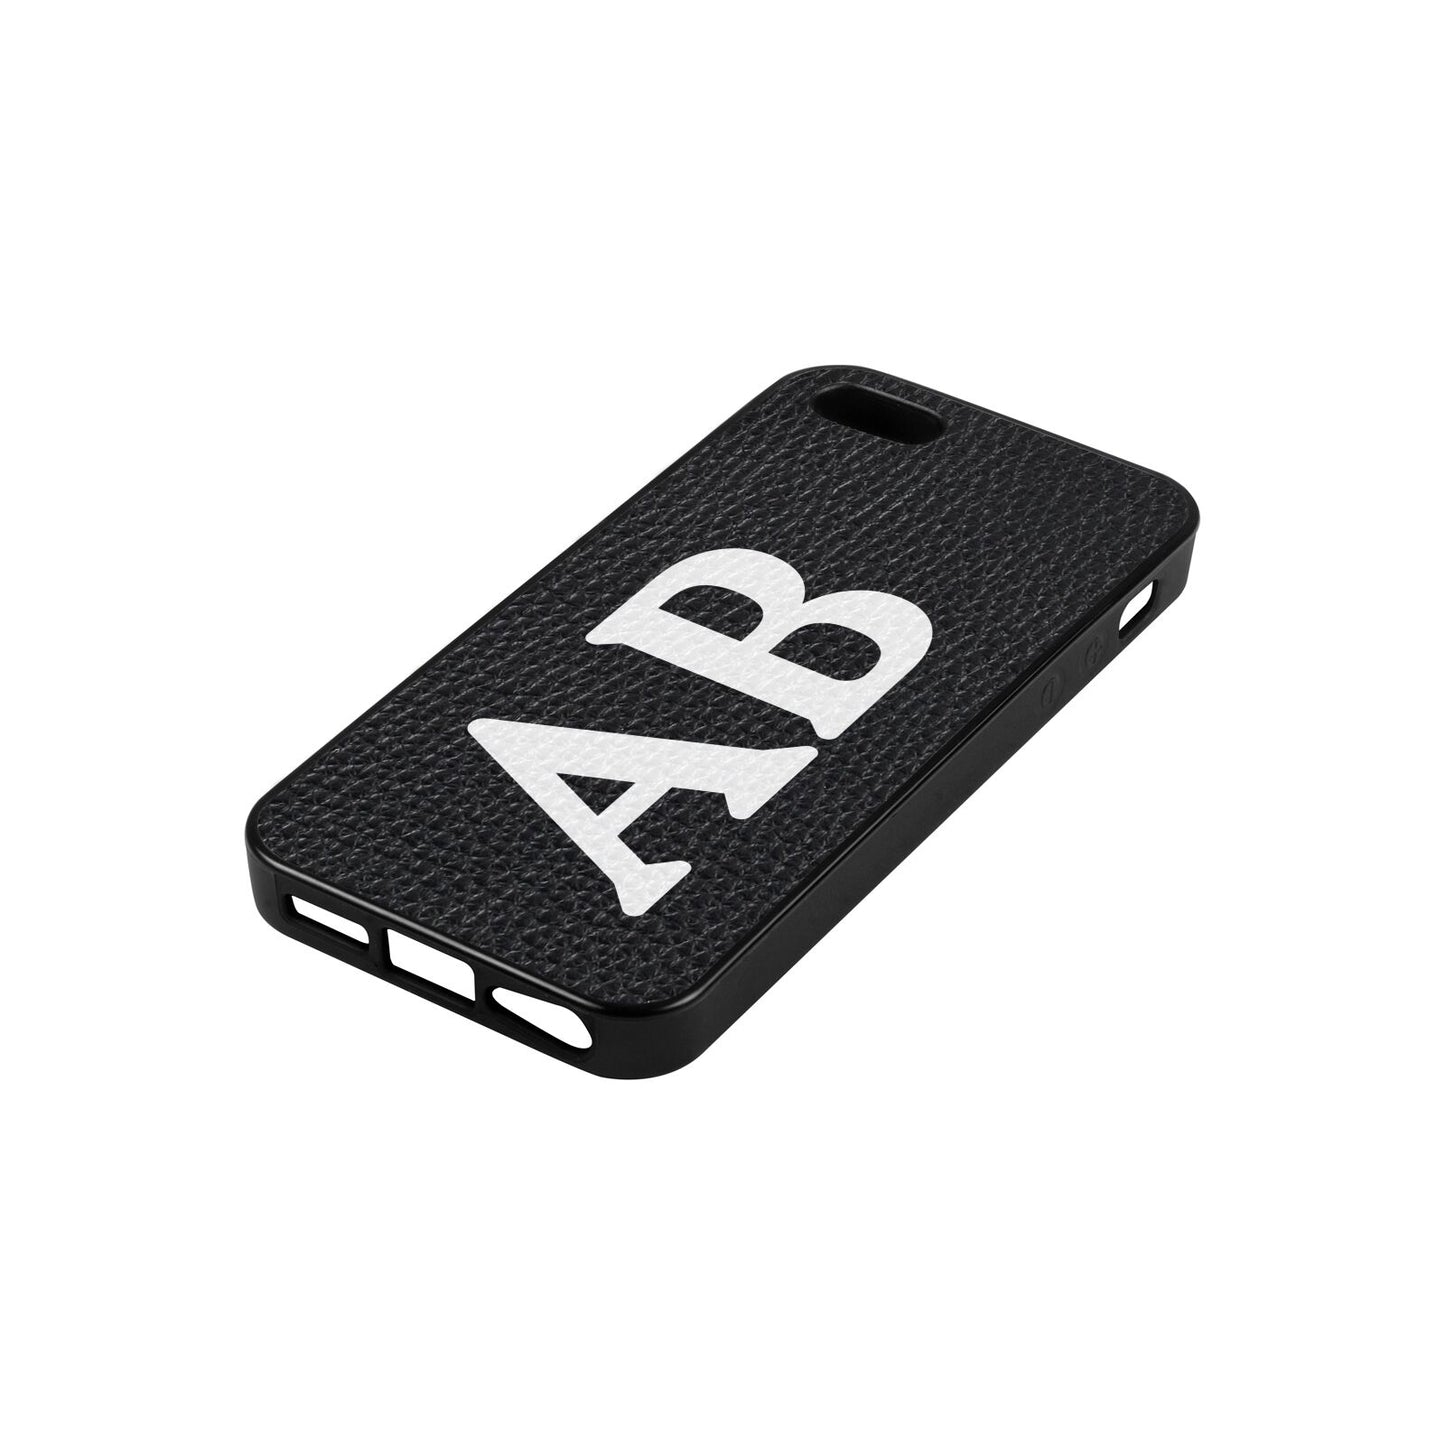 Serif Initials Black Pebble Leather iPhone 5 Case Side Angle